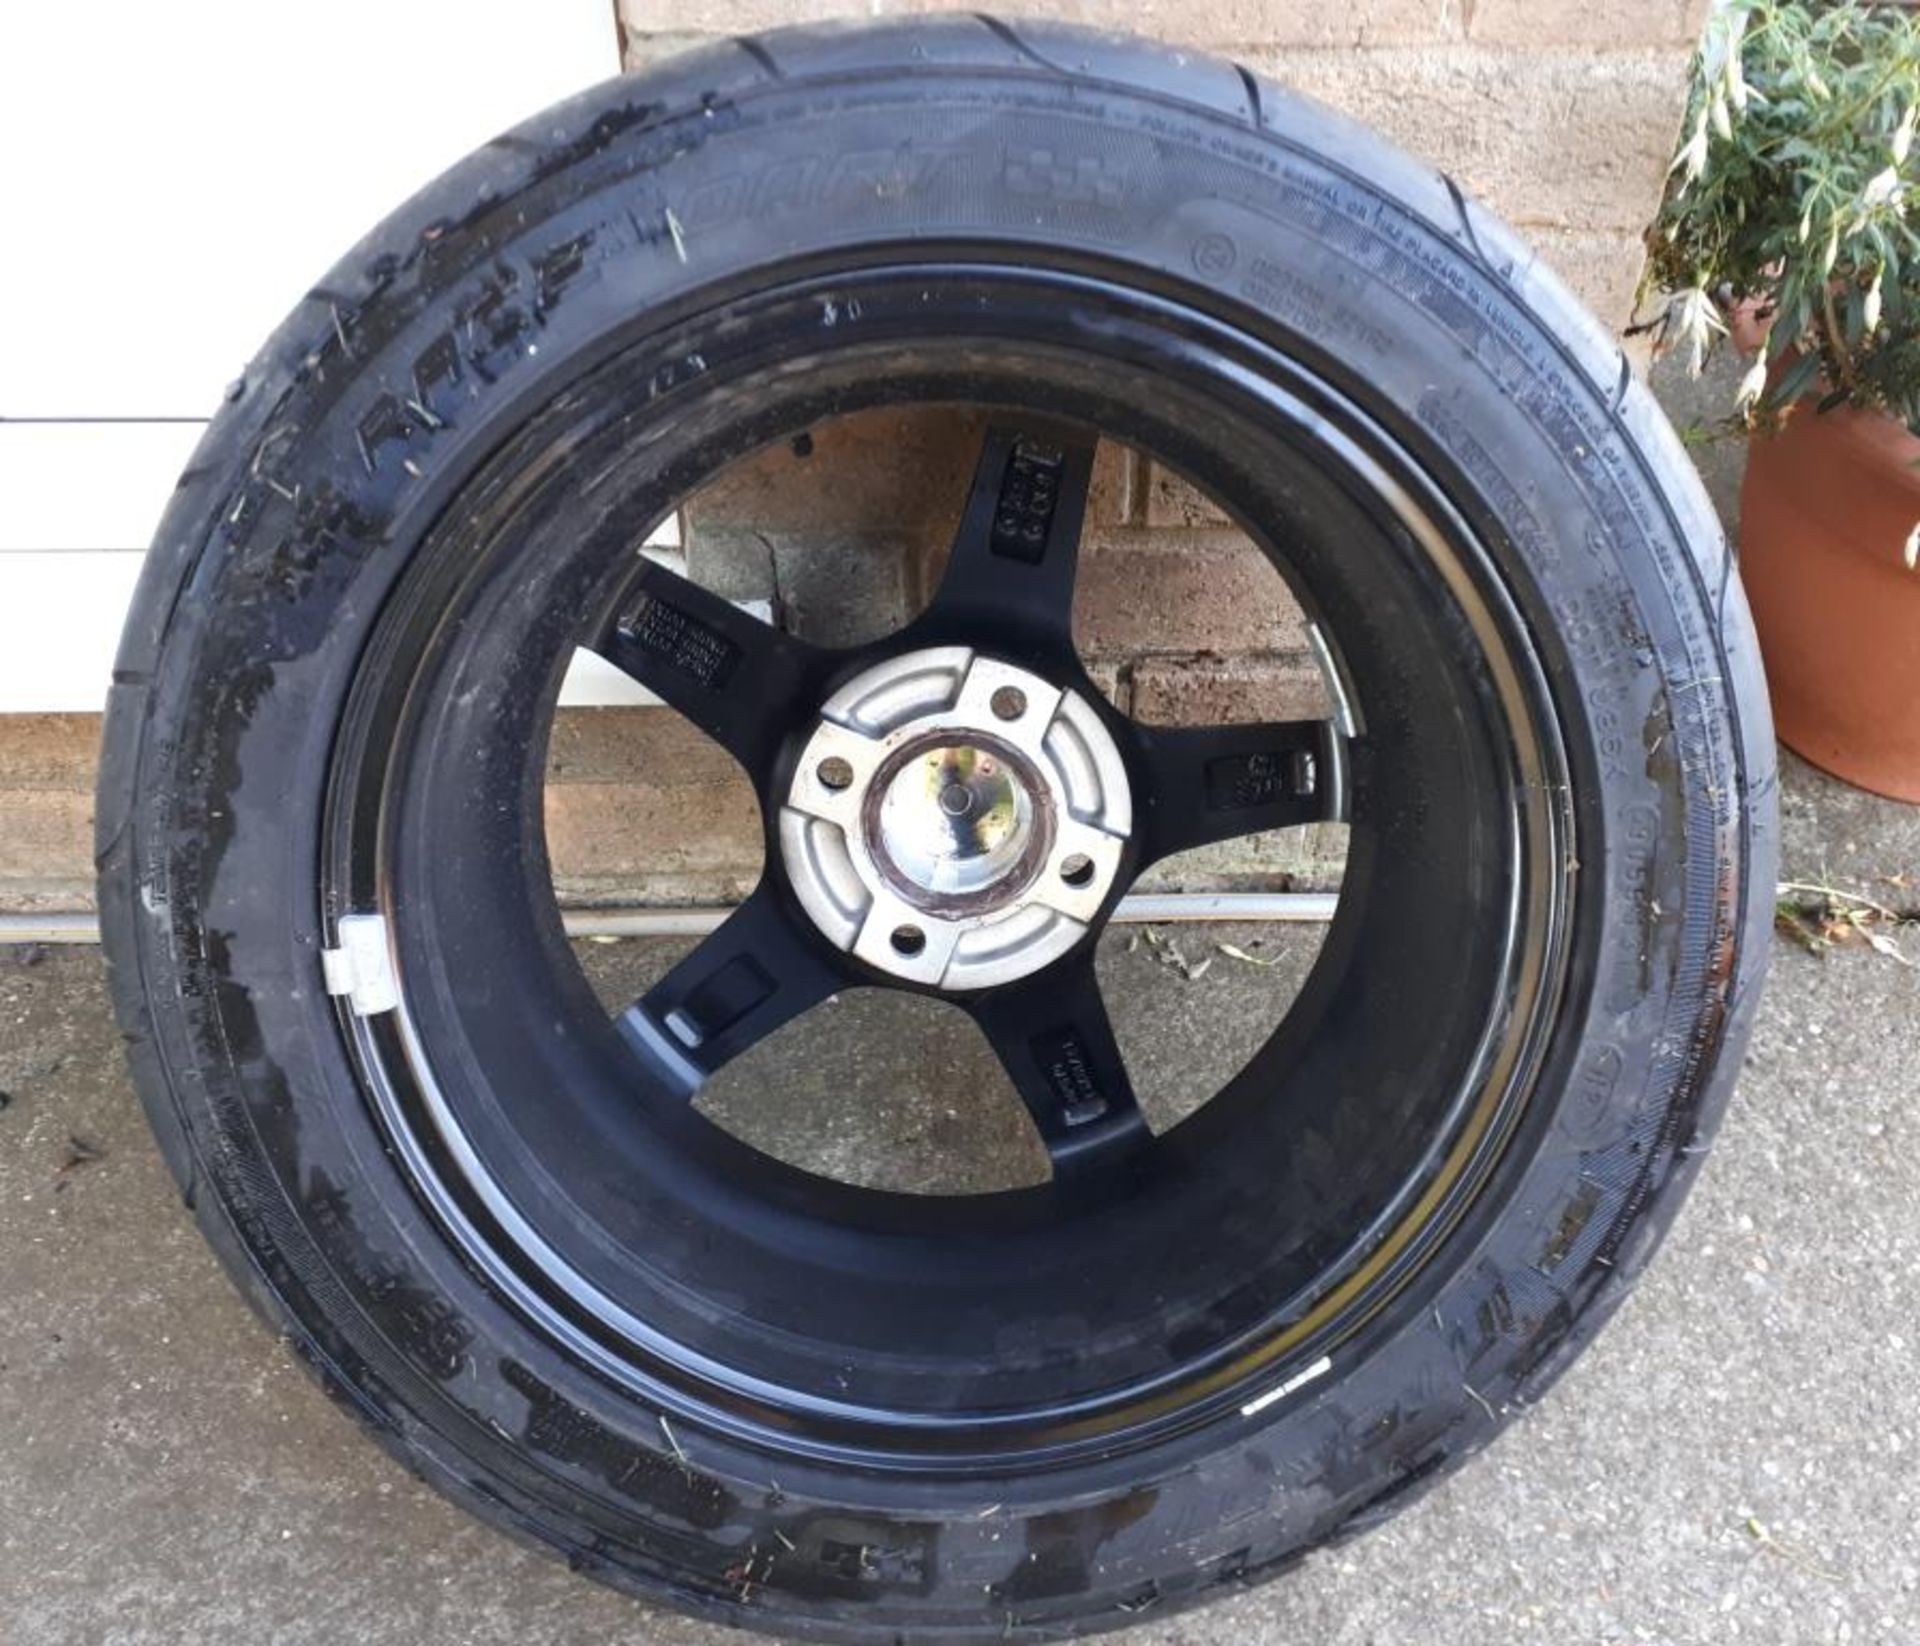 As New 15 inch Alloy wheels 195 / 50 soft compound track day tyres Ford fitment Fiesta ST 150 - Image 4 of 4